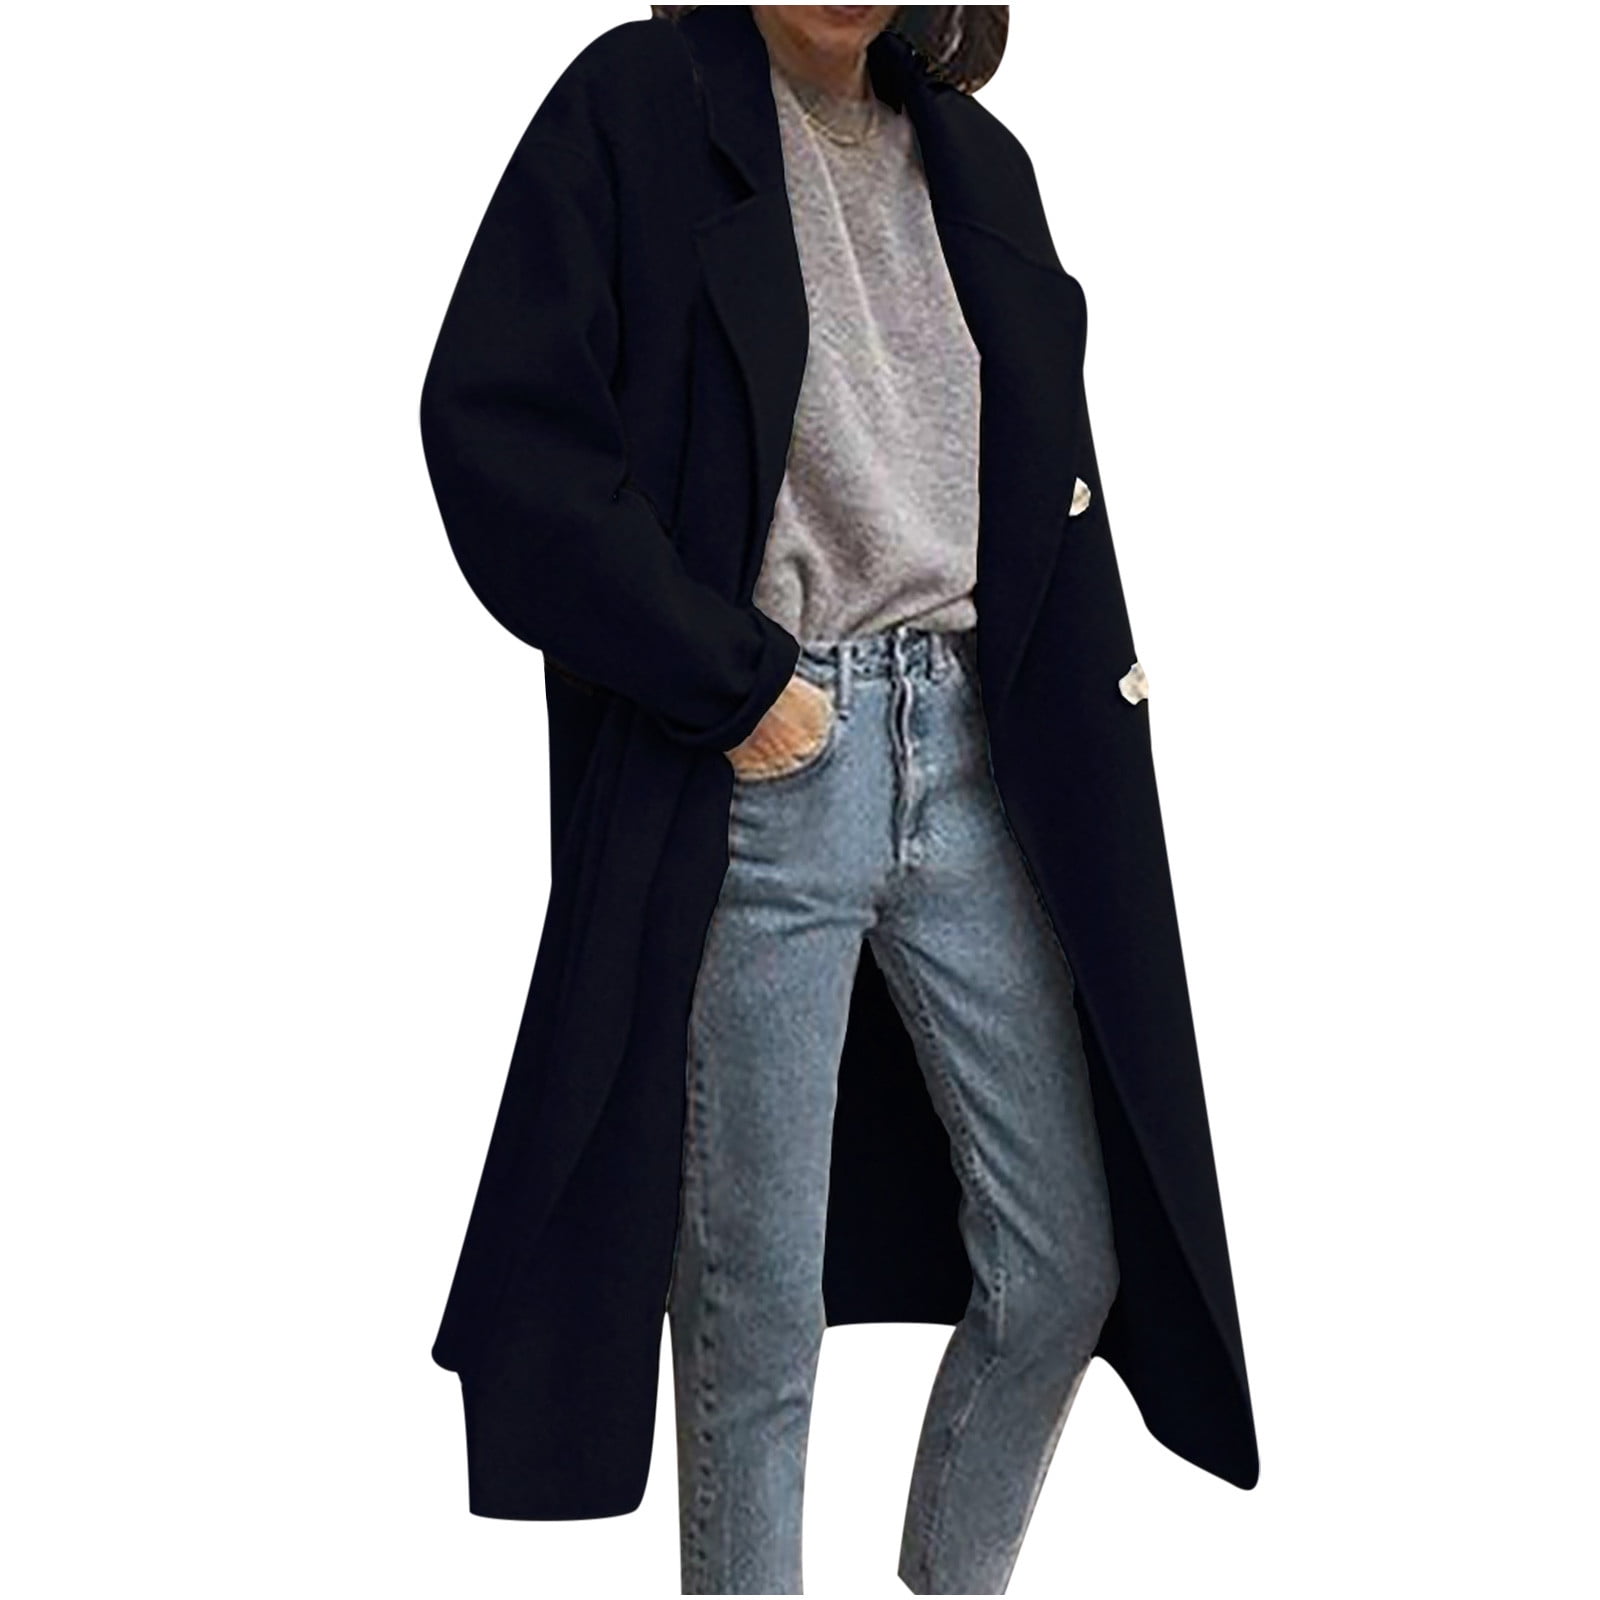  Scyoekwg my order placed by me Womens Jackets Fashion Fall  Lapel Double Breasted Thick Wool Trench Coat Winter Warm Pockets Long  Jacket : Sports & Outdoors